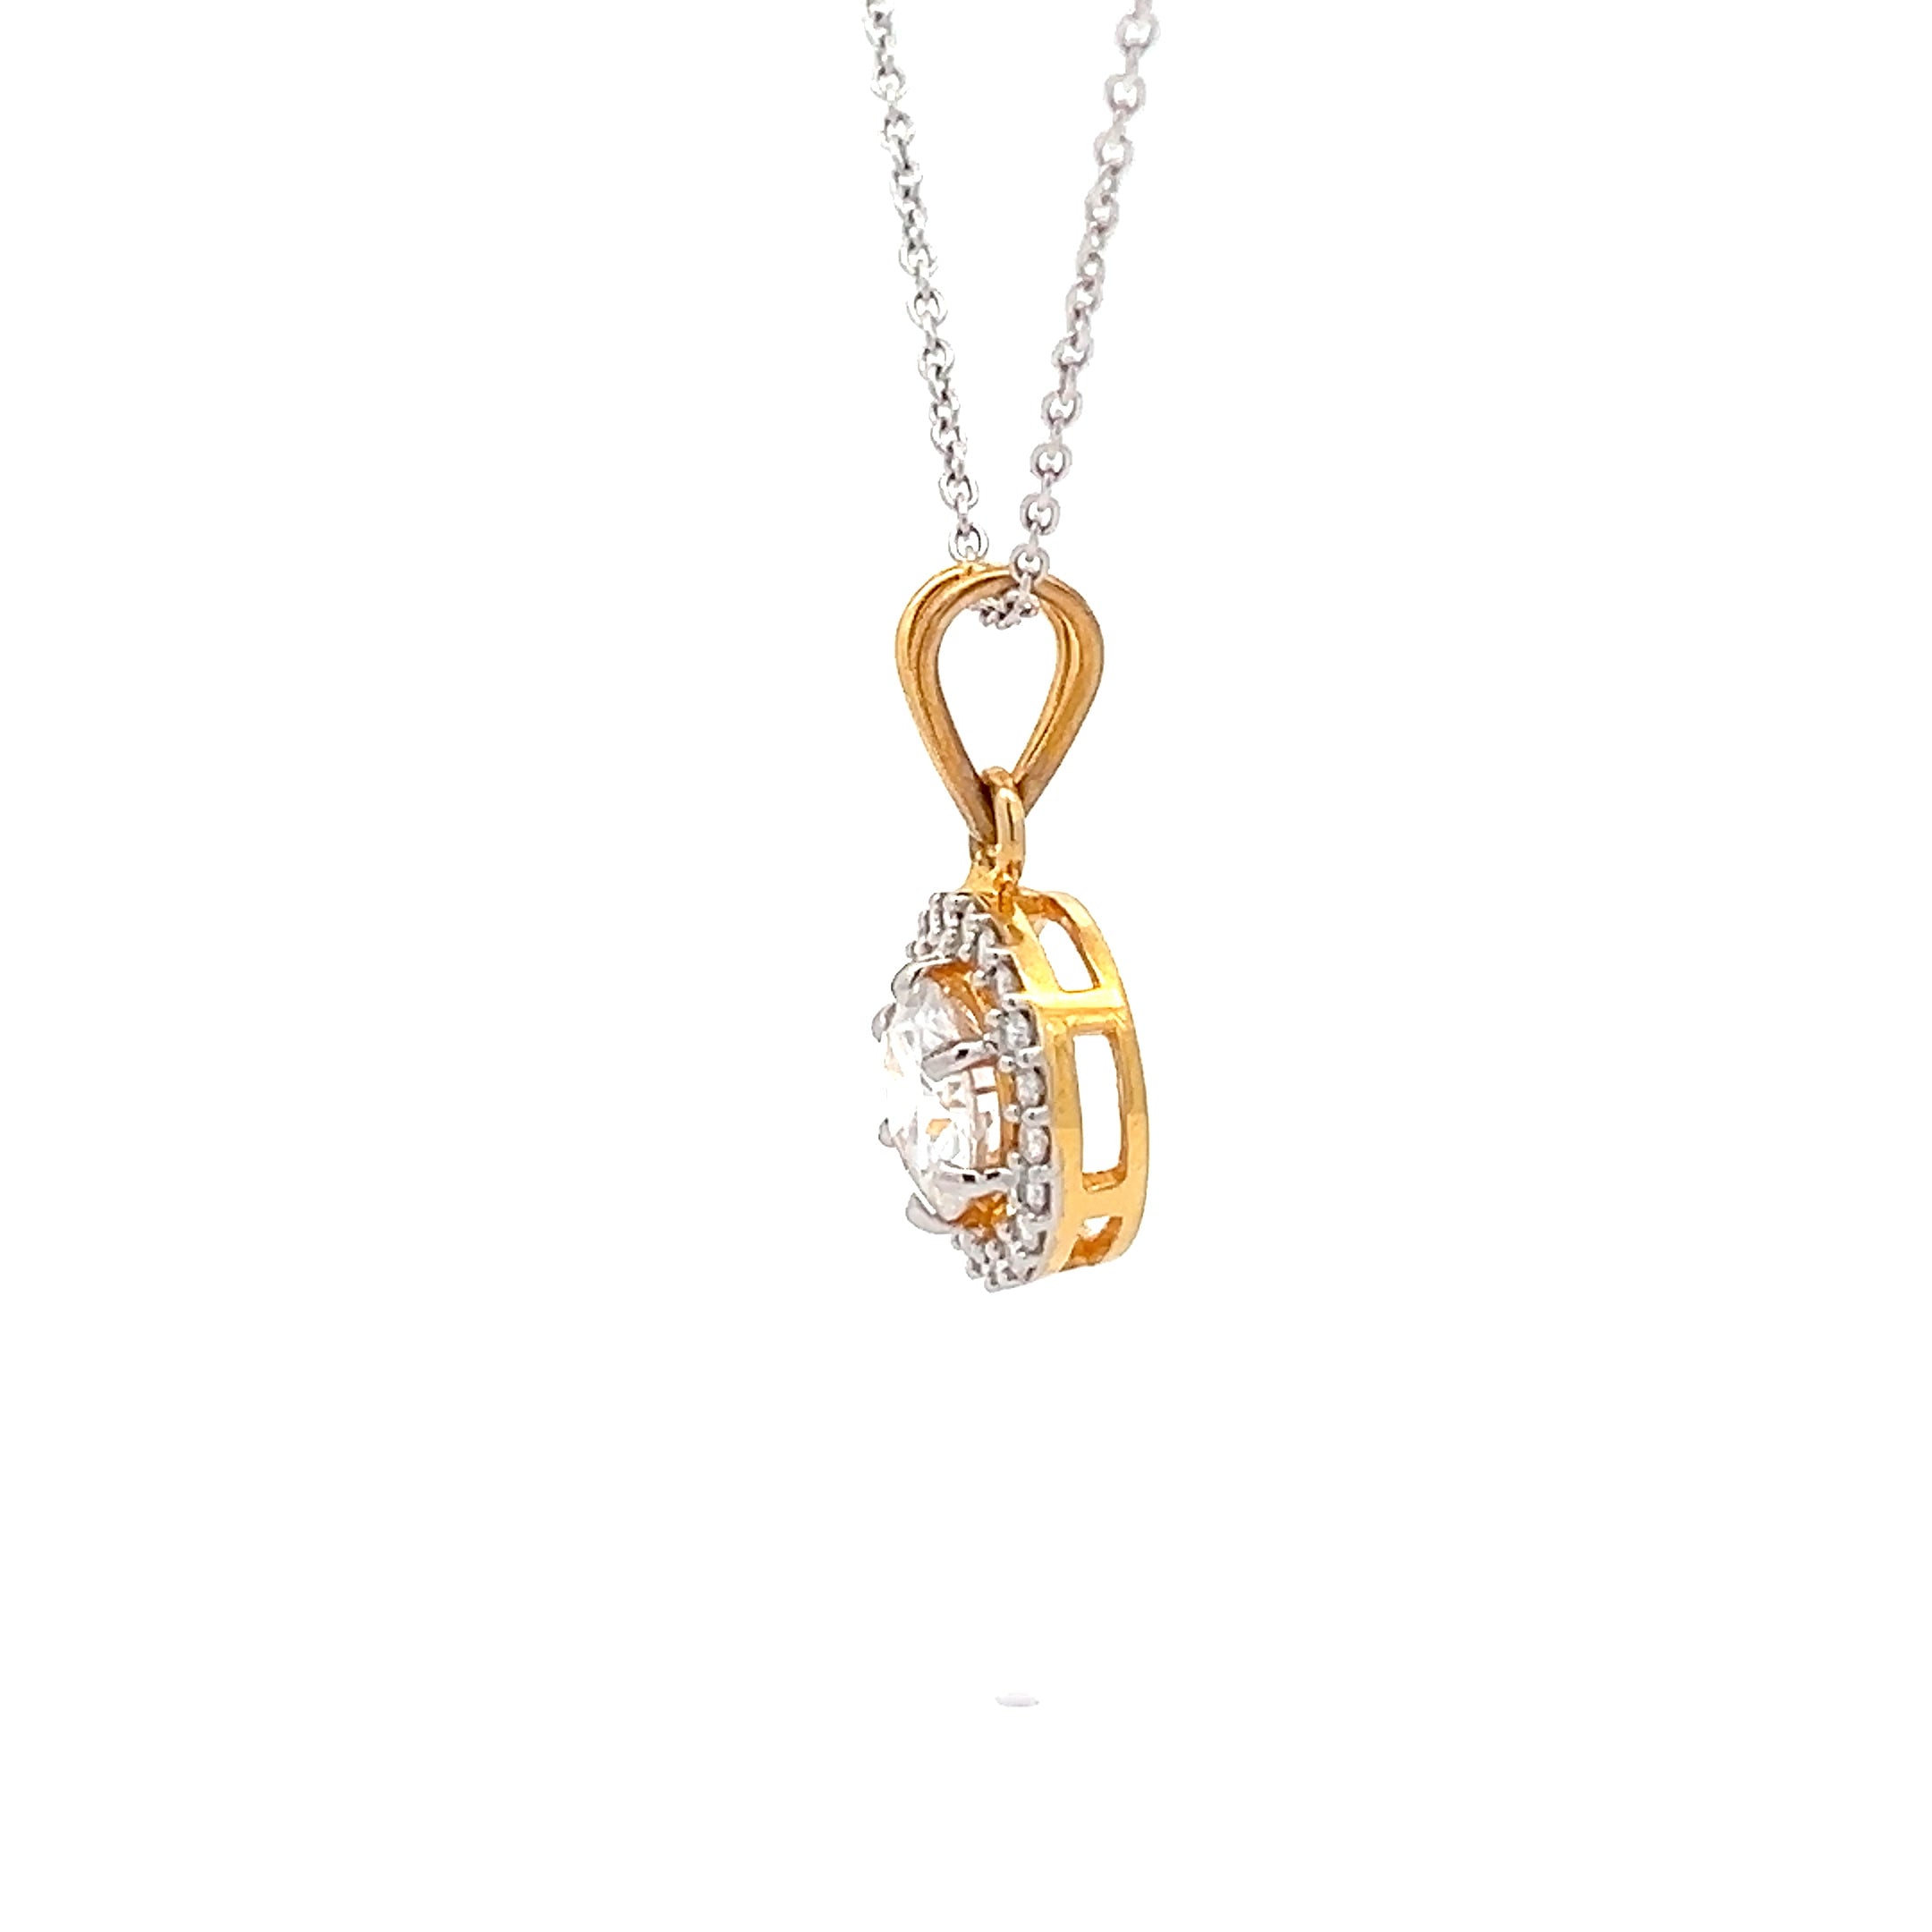 Graceful Flower Diamond Pendant 2.45ct In Round Shape Solitaire 14k Gold With Lab Grown Moissanite